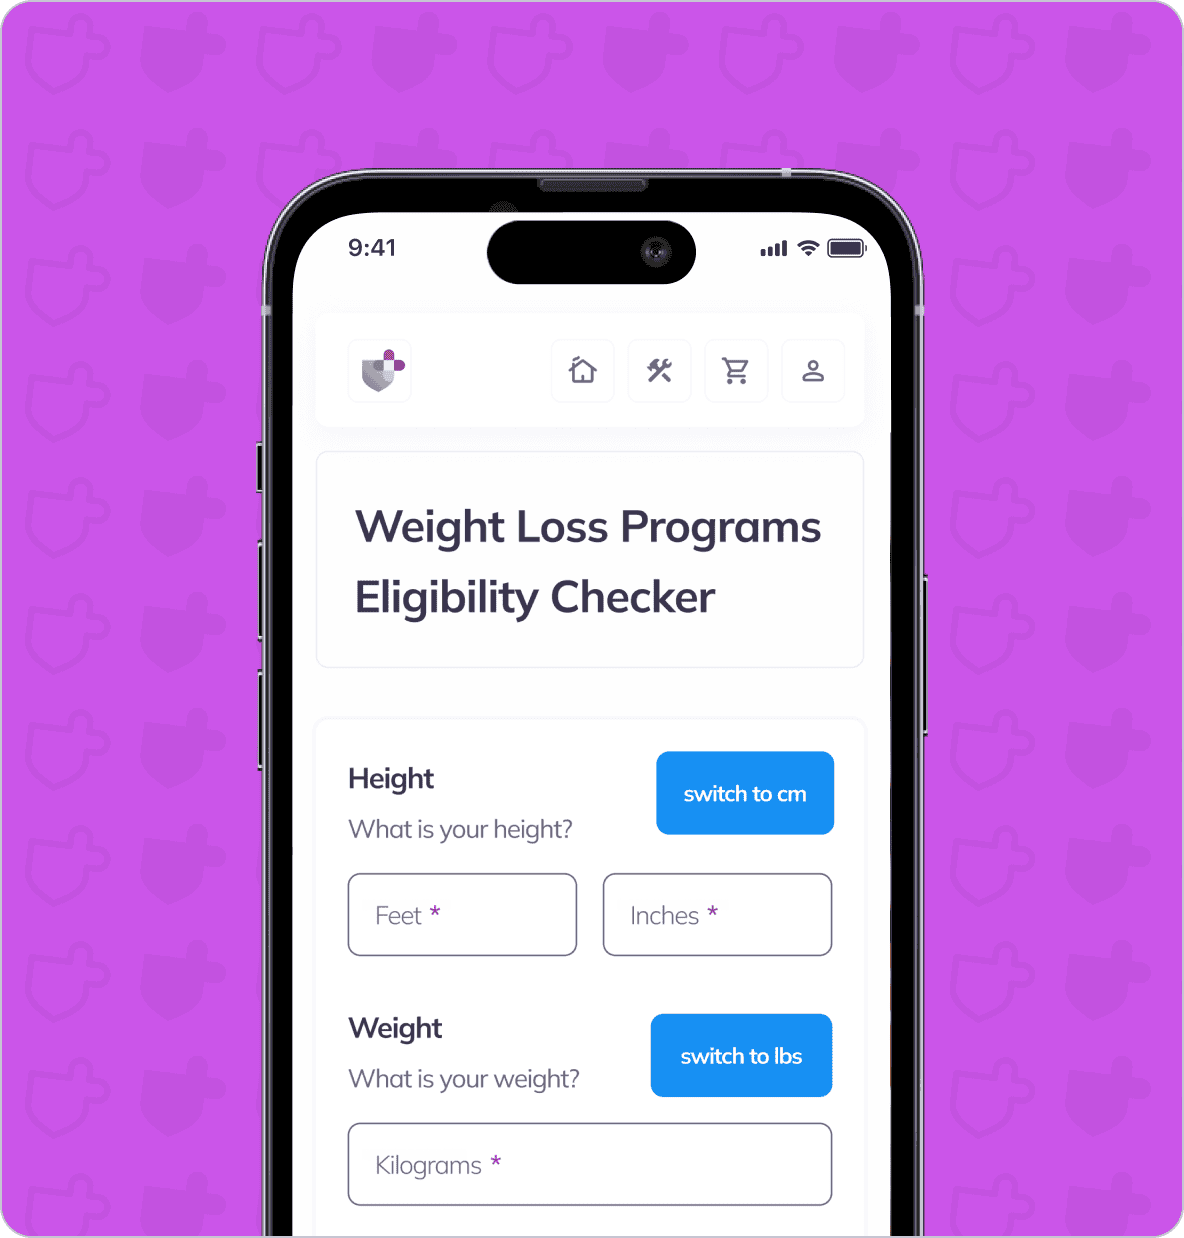 A smartphone screen displaying a weight loss program eligibility checker with fields for height and weight in different units. The screen has a purple background with shield icons.